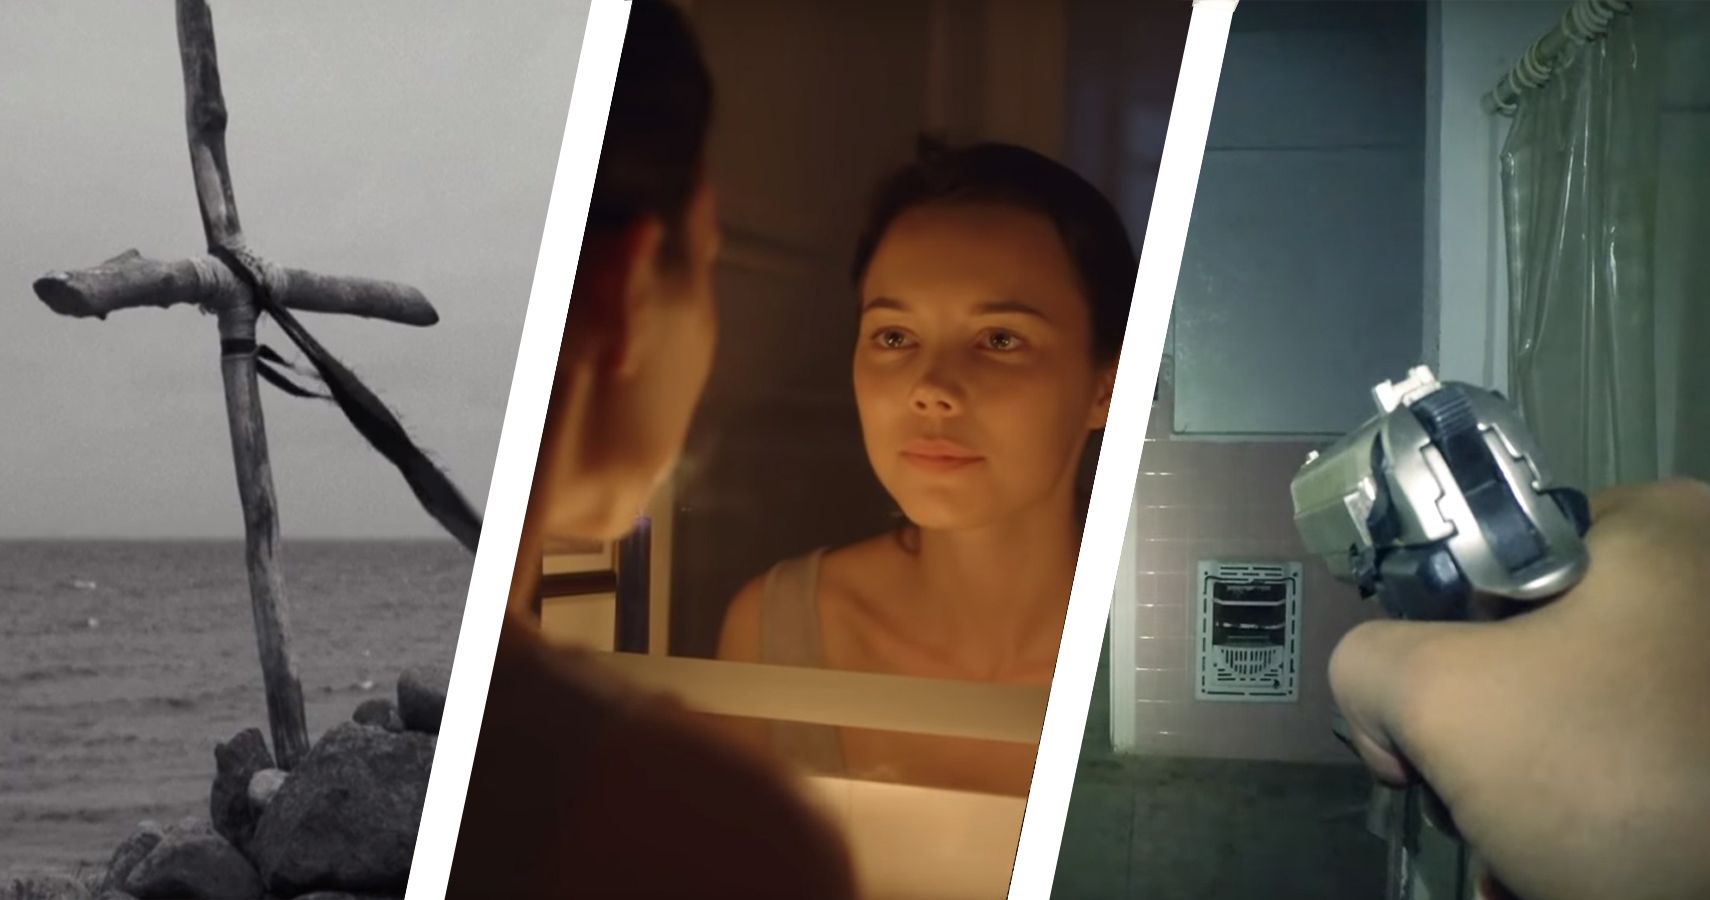 15 Of The Scariest Short Horror Films You Can Watch On Youtube Right Now